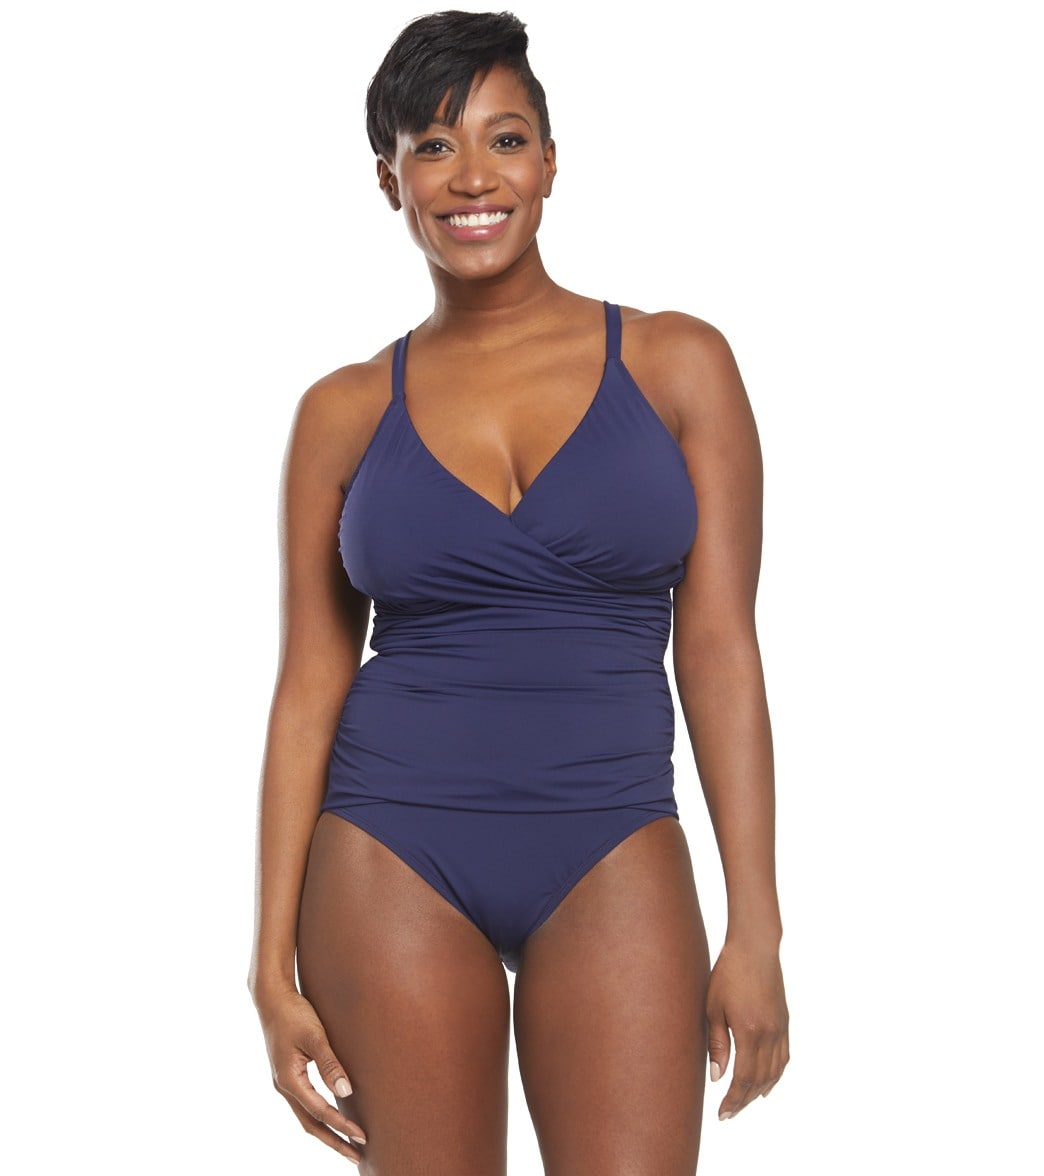 Tommy Bahama Women's Pearl Solid Novelty One Shoulder One Piece Swimsuit at